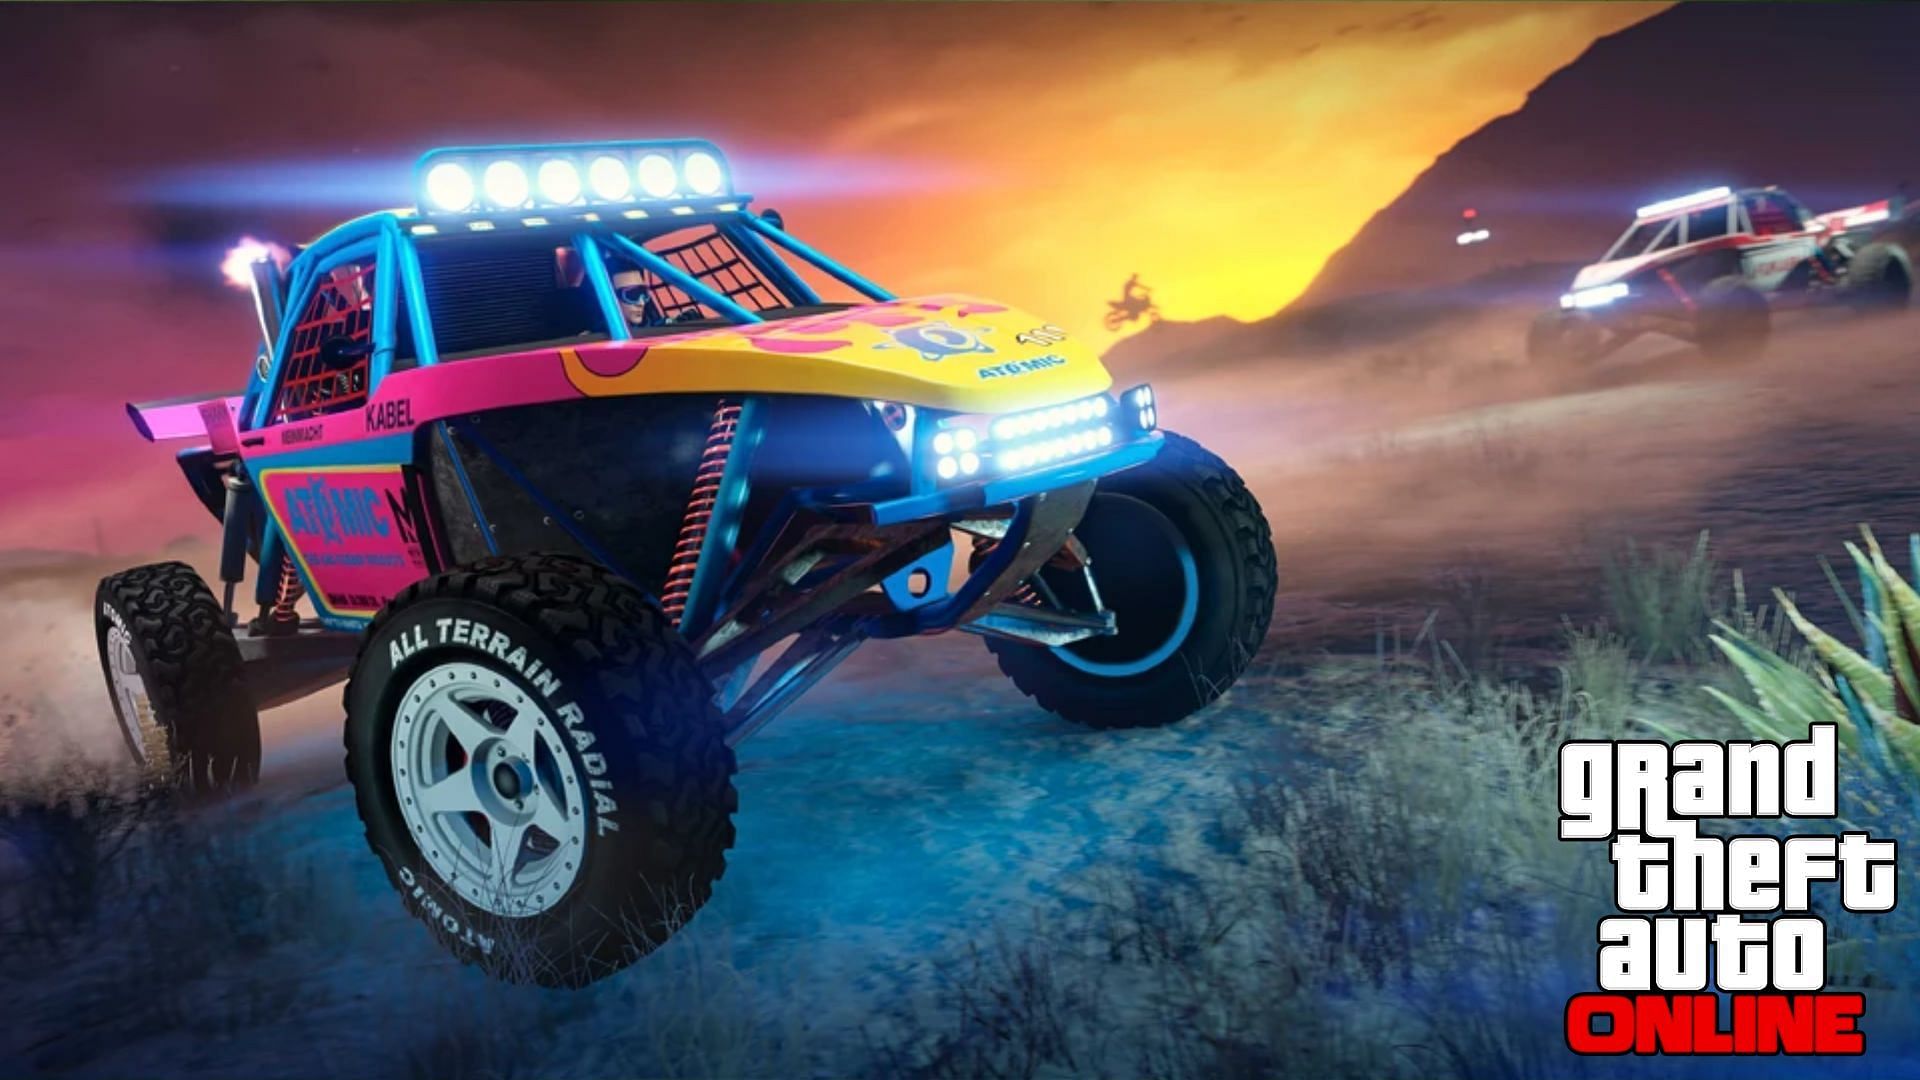 The Vapid Ratel is one of the fastest off-road cars in GTA Online (Image via Rockstar Games)